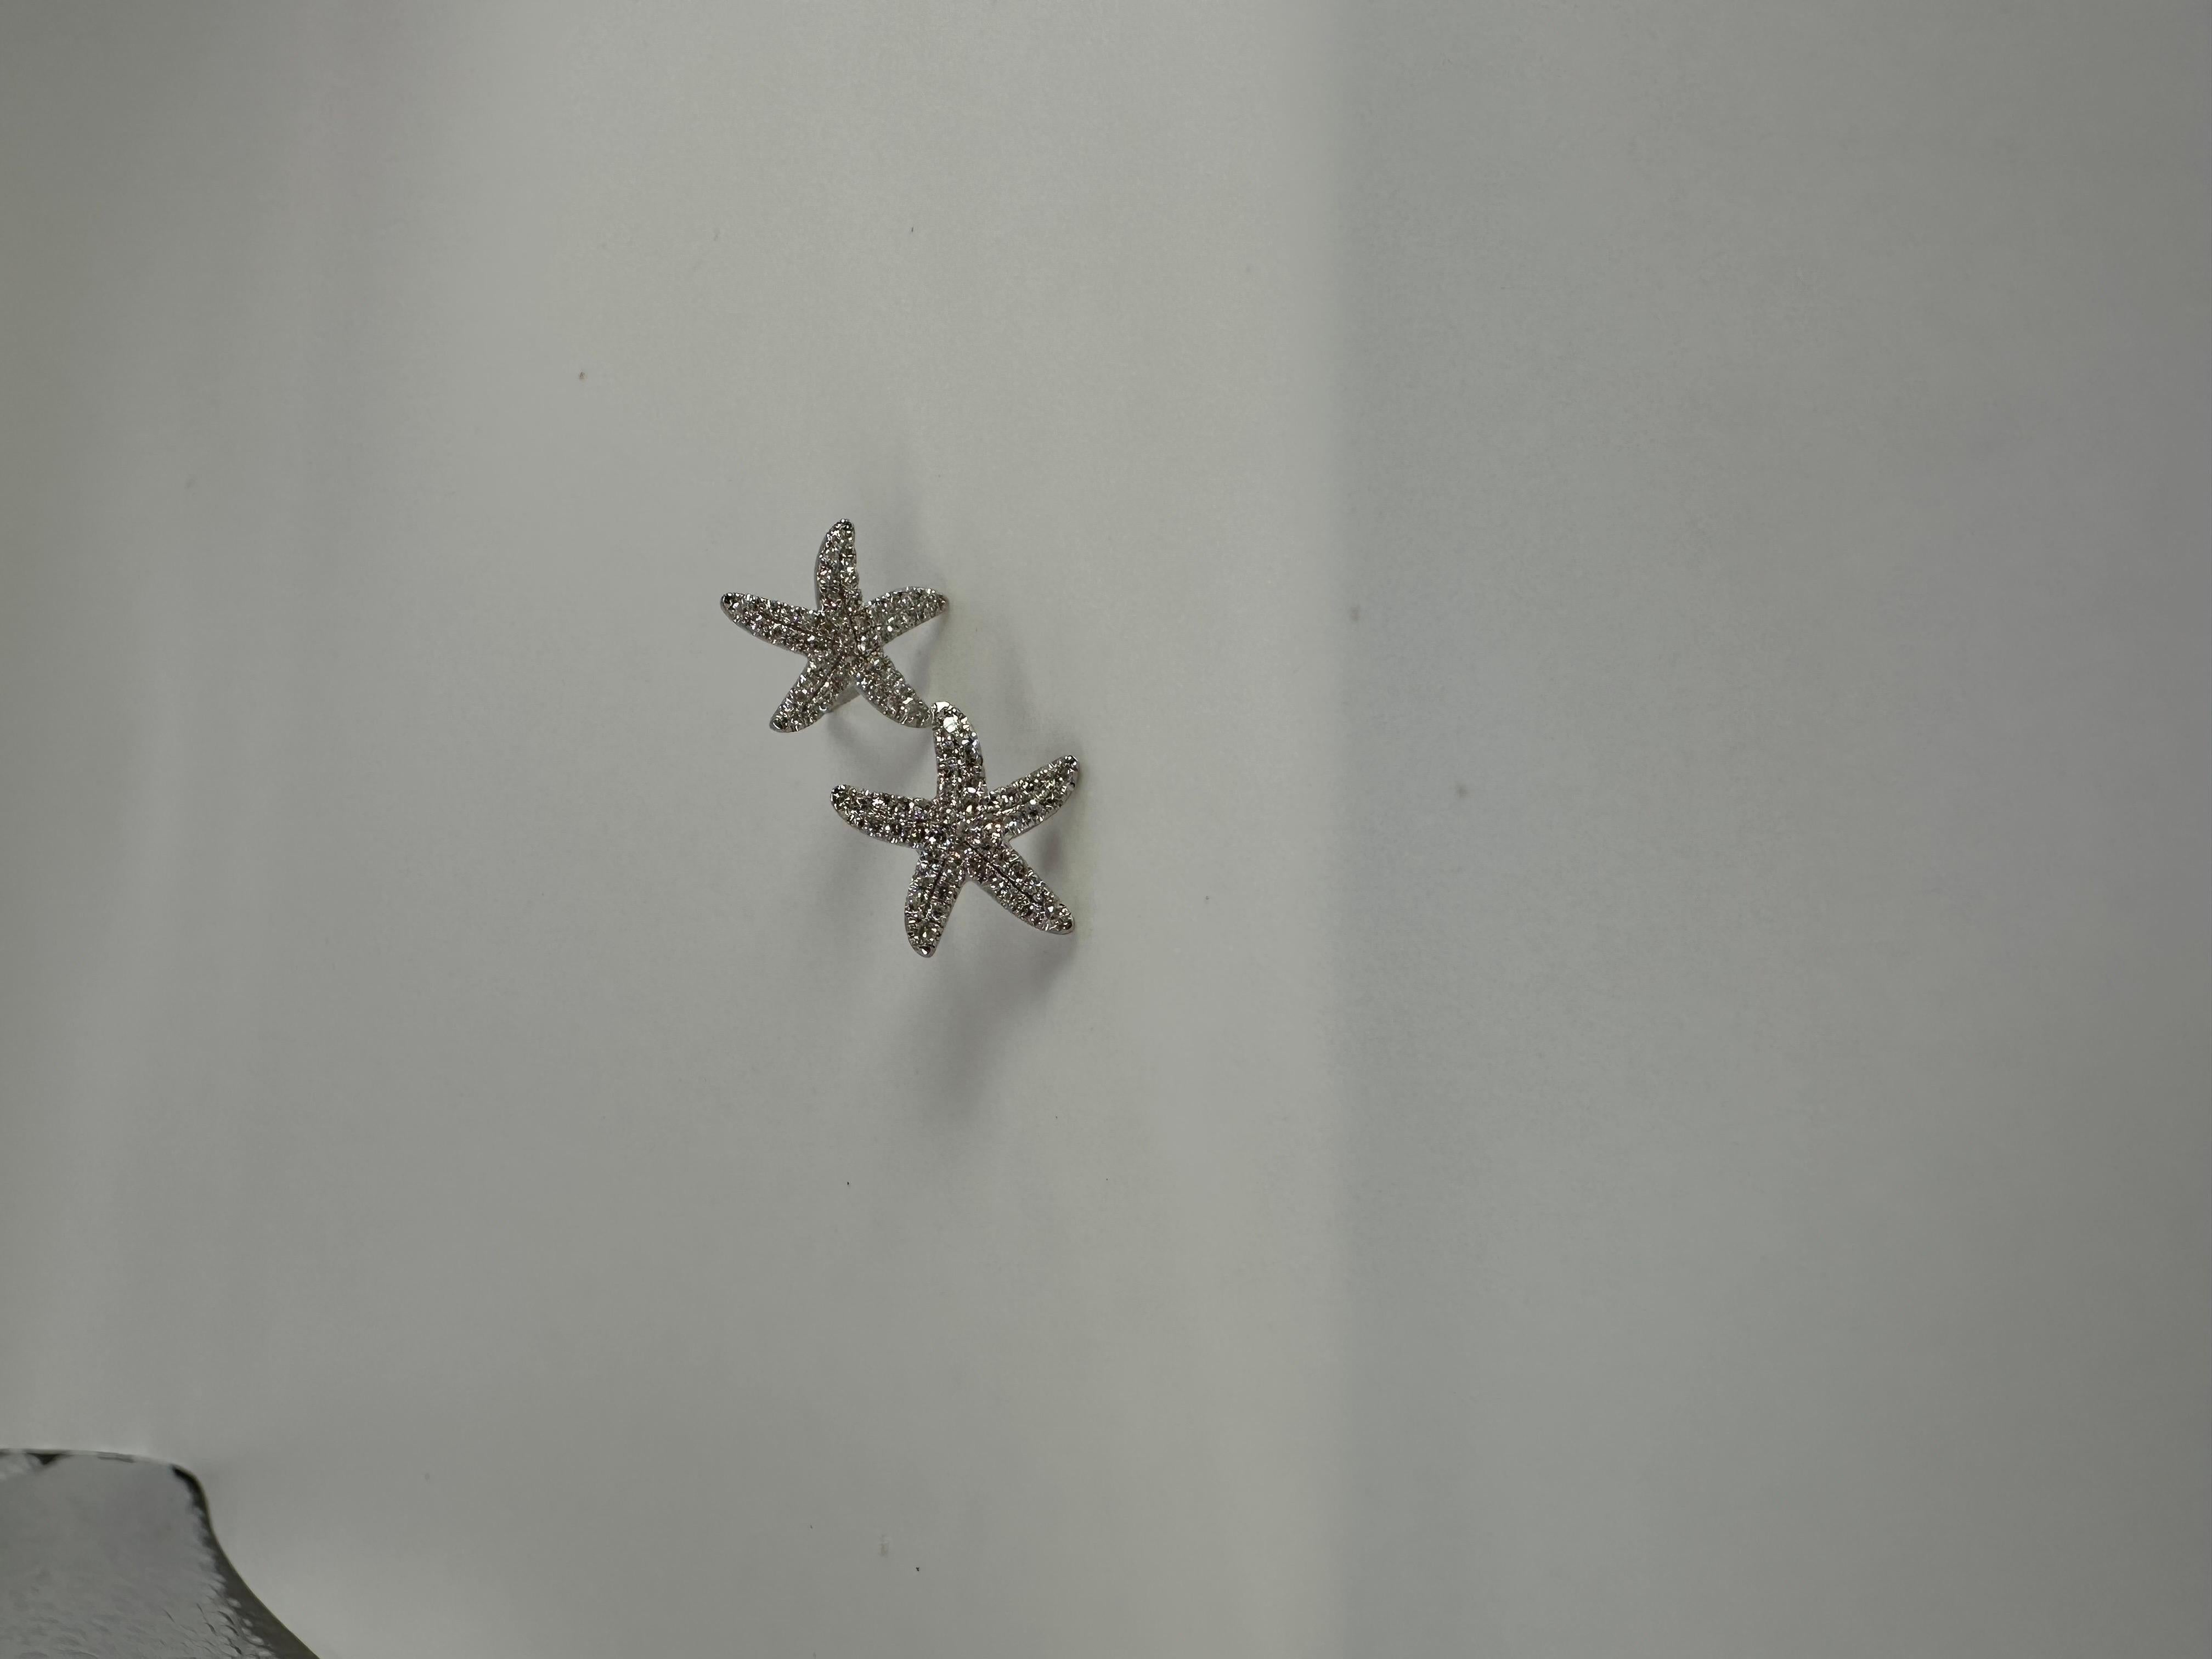 Pretty starfish studs with diamonds in 14KT white gold.

GOLD: 14KT gold
NATURAL DIAMOND(S)
Clarity/Color: SI/G-H
Carat:0.33ct
Grams:2.30
Item#: 150-00154 PFT

WHAT YOU GET AT STAMPAR JEWELERS:
Stampar Jewelers, located in the heart of Jupiter,